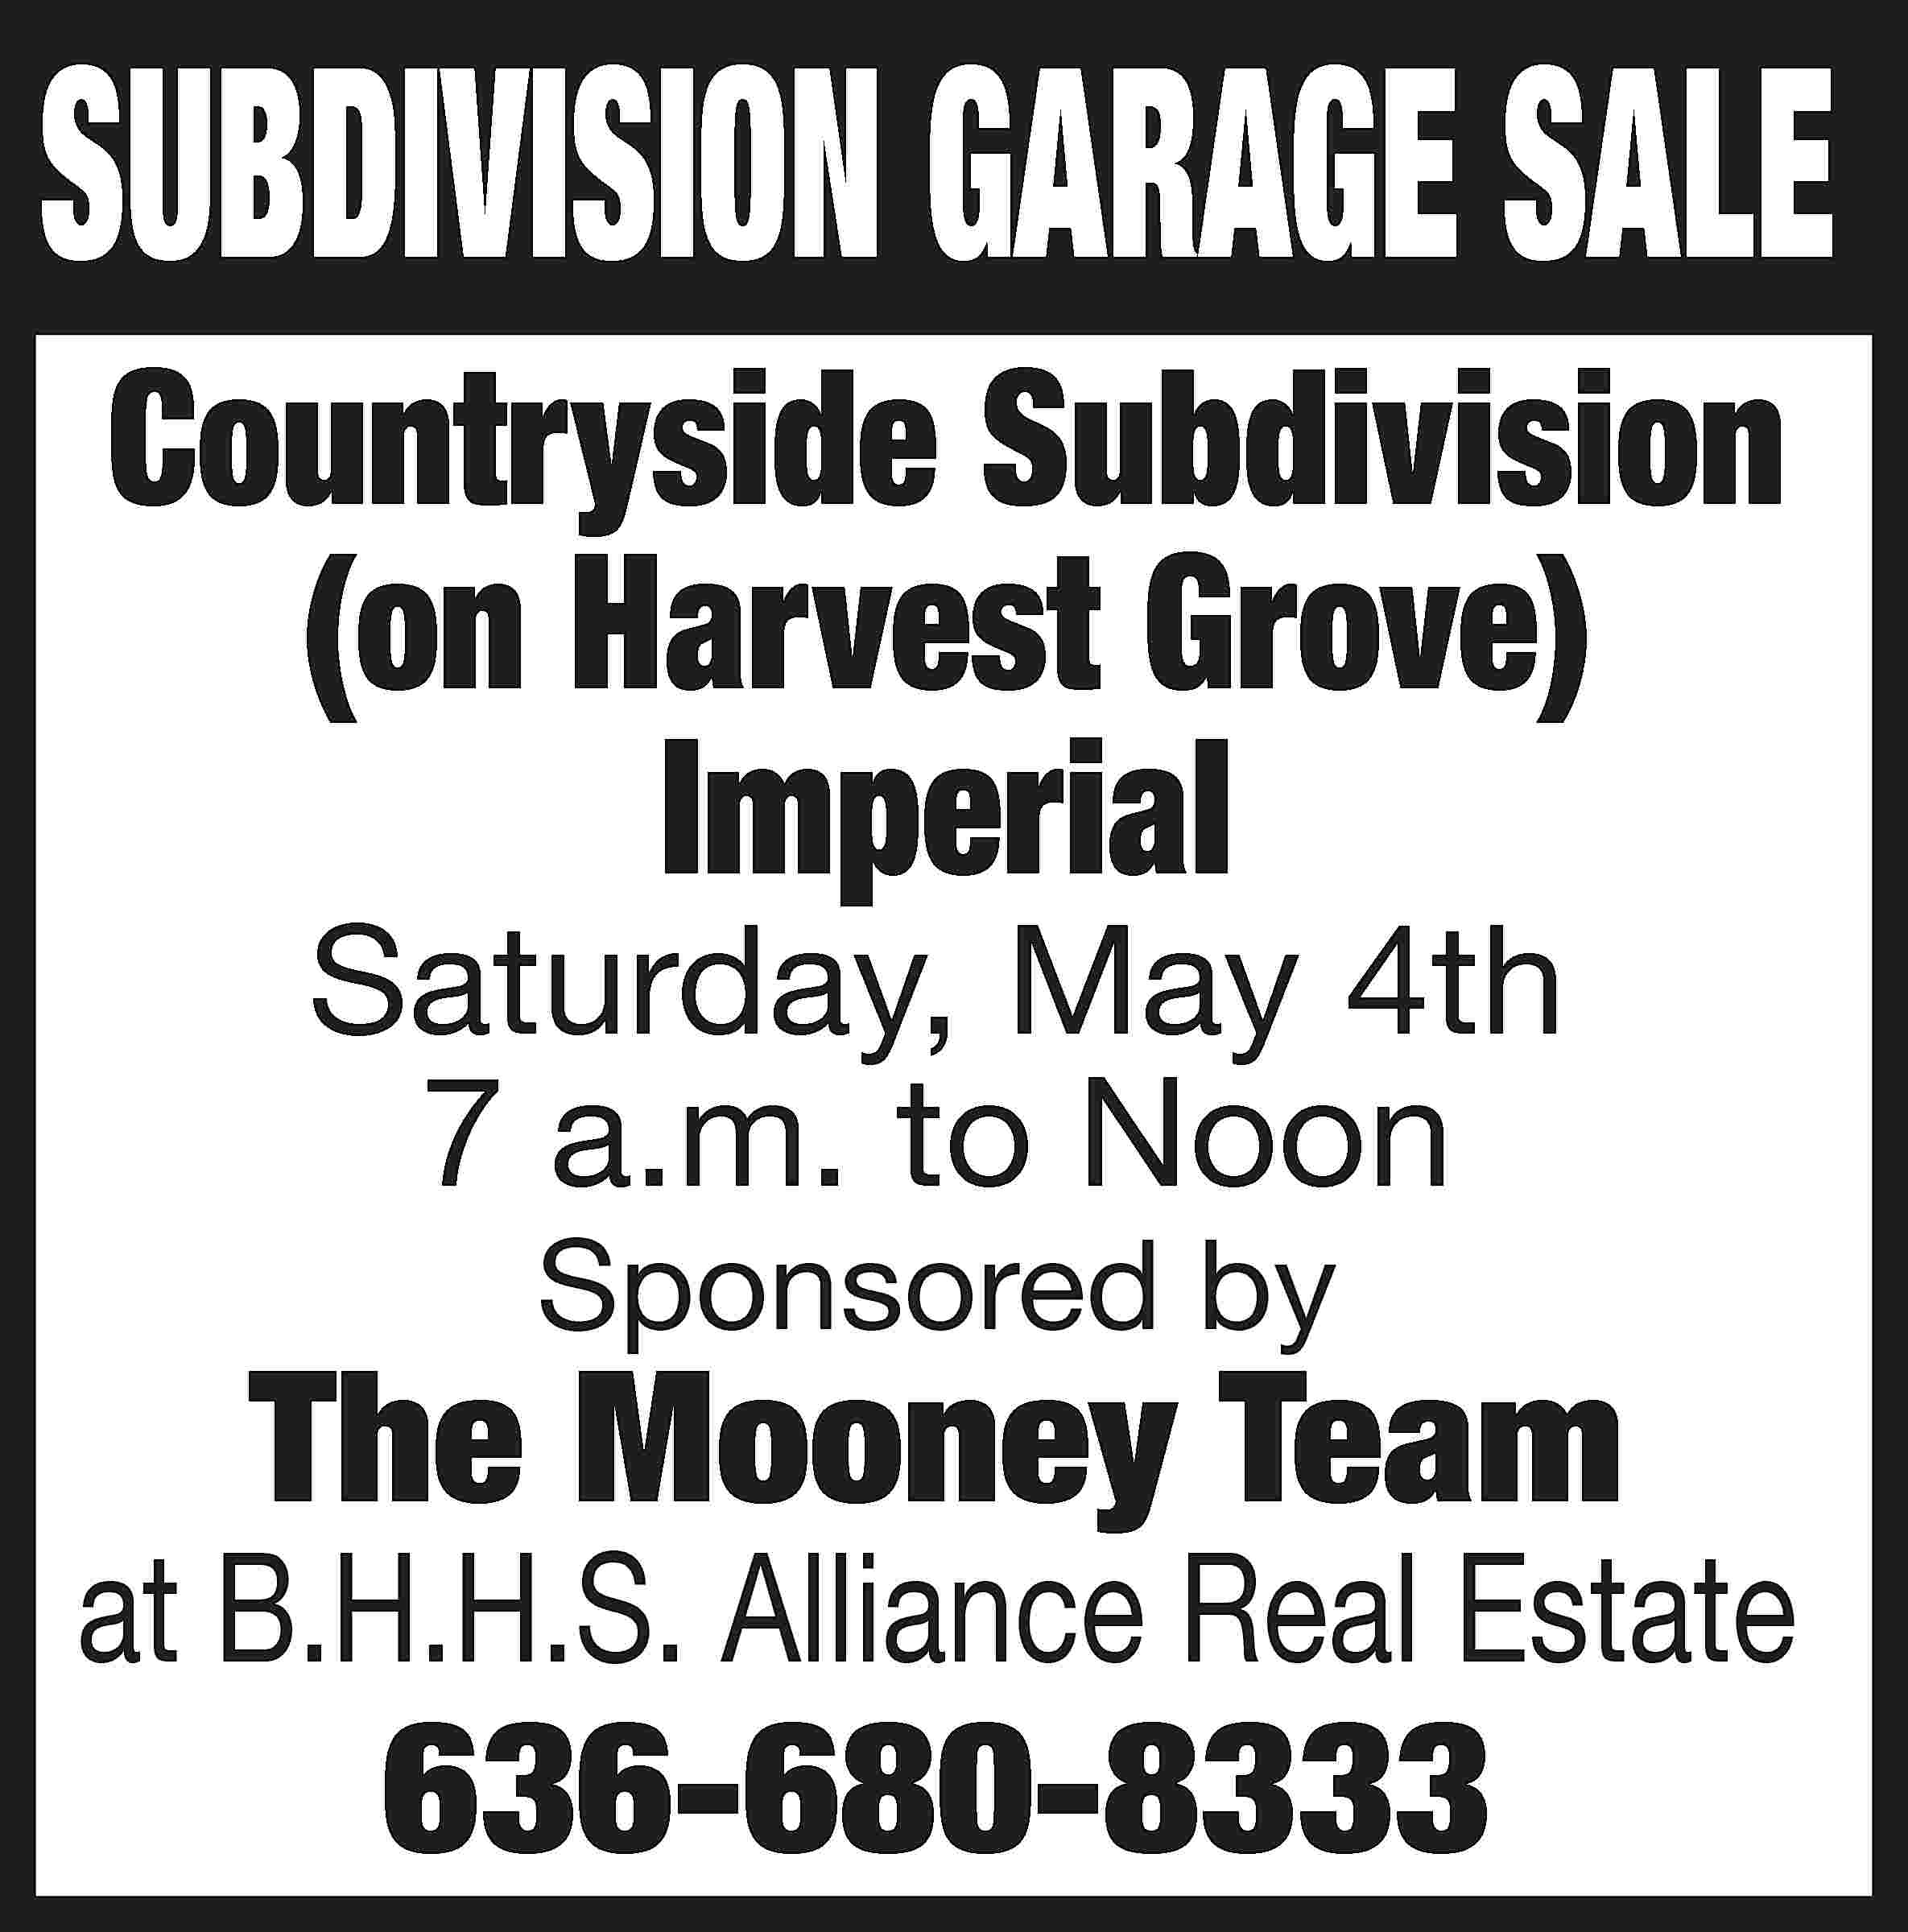 SUBDIVISION GARAGE SALE Countryside Subdivision  SUBDIVISION GARAGE SALE Countryside Subdivision (on Harvest Grove) Imperial Saturday, May 4th 7 a.m. to Noon Sponsored by The Mooney Team at B.H.H.S. Alliance Real Estate 636-680-8333